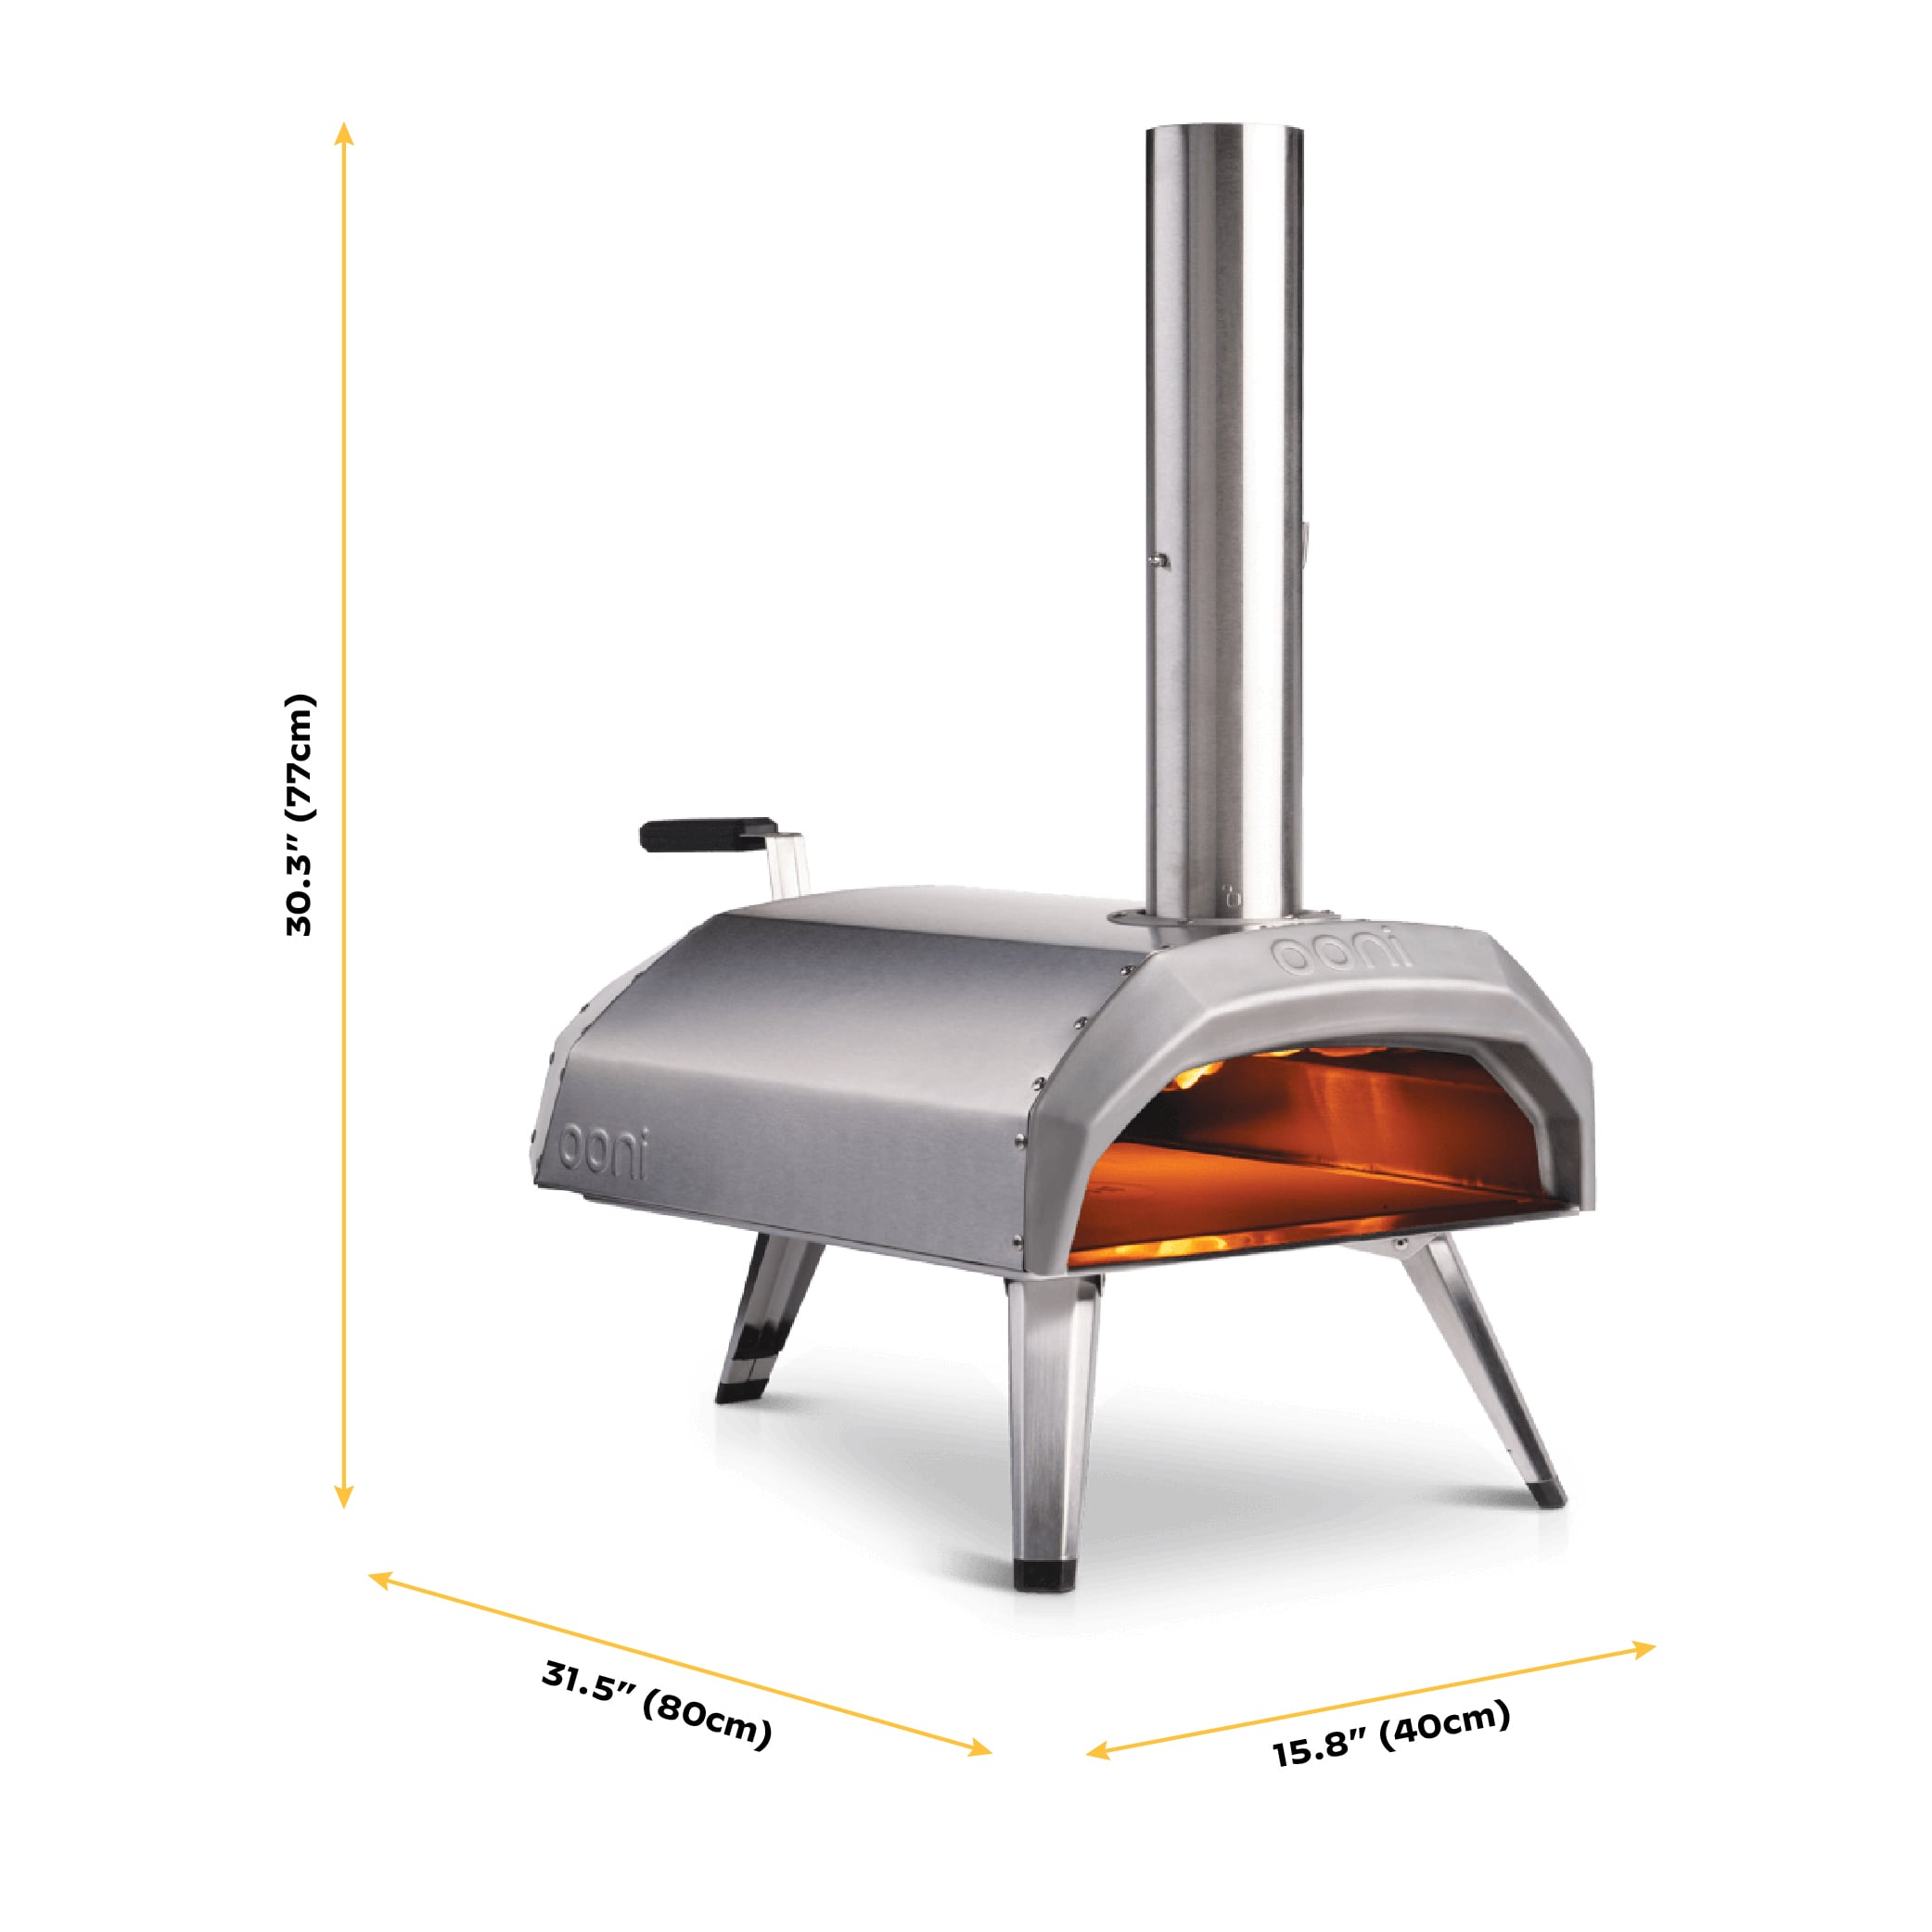 Ooni Karu 12 Insulated Steel Hearth Wood-fired Outdoor Pizza Oven